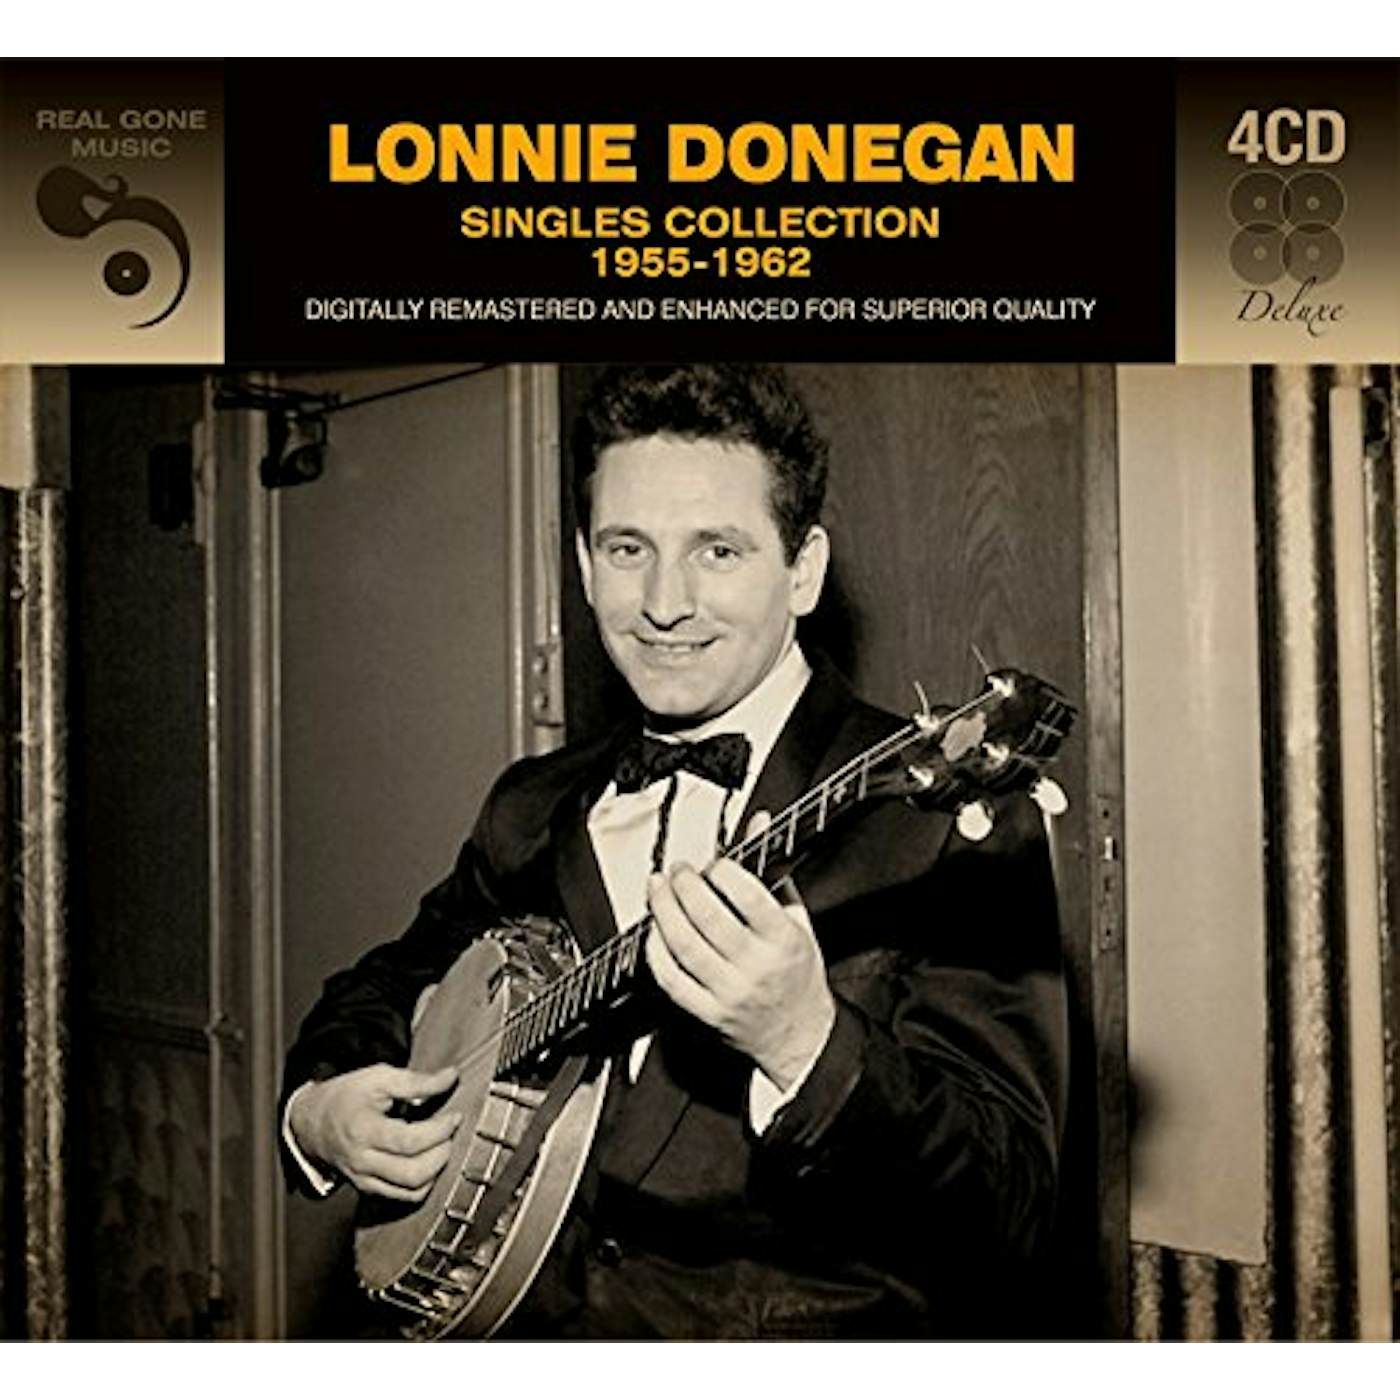 Lonnie Donegan SINGLES COLLECTION 1955-1962 CD